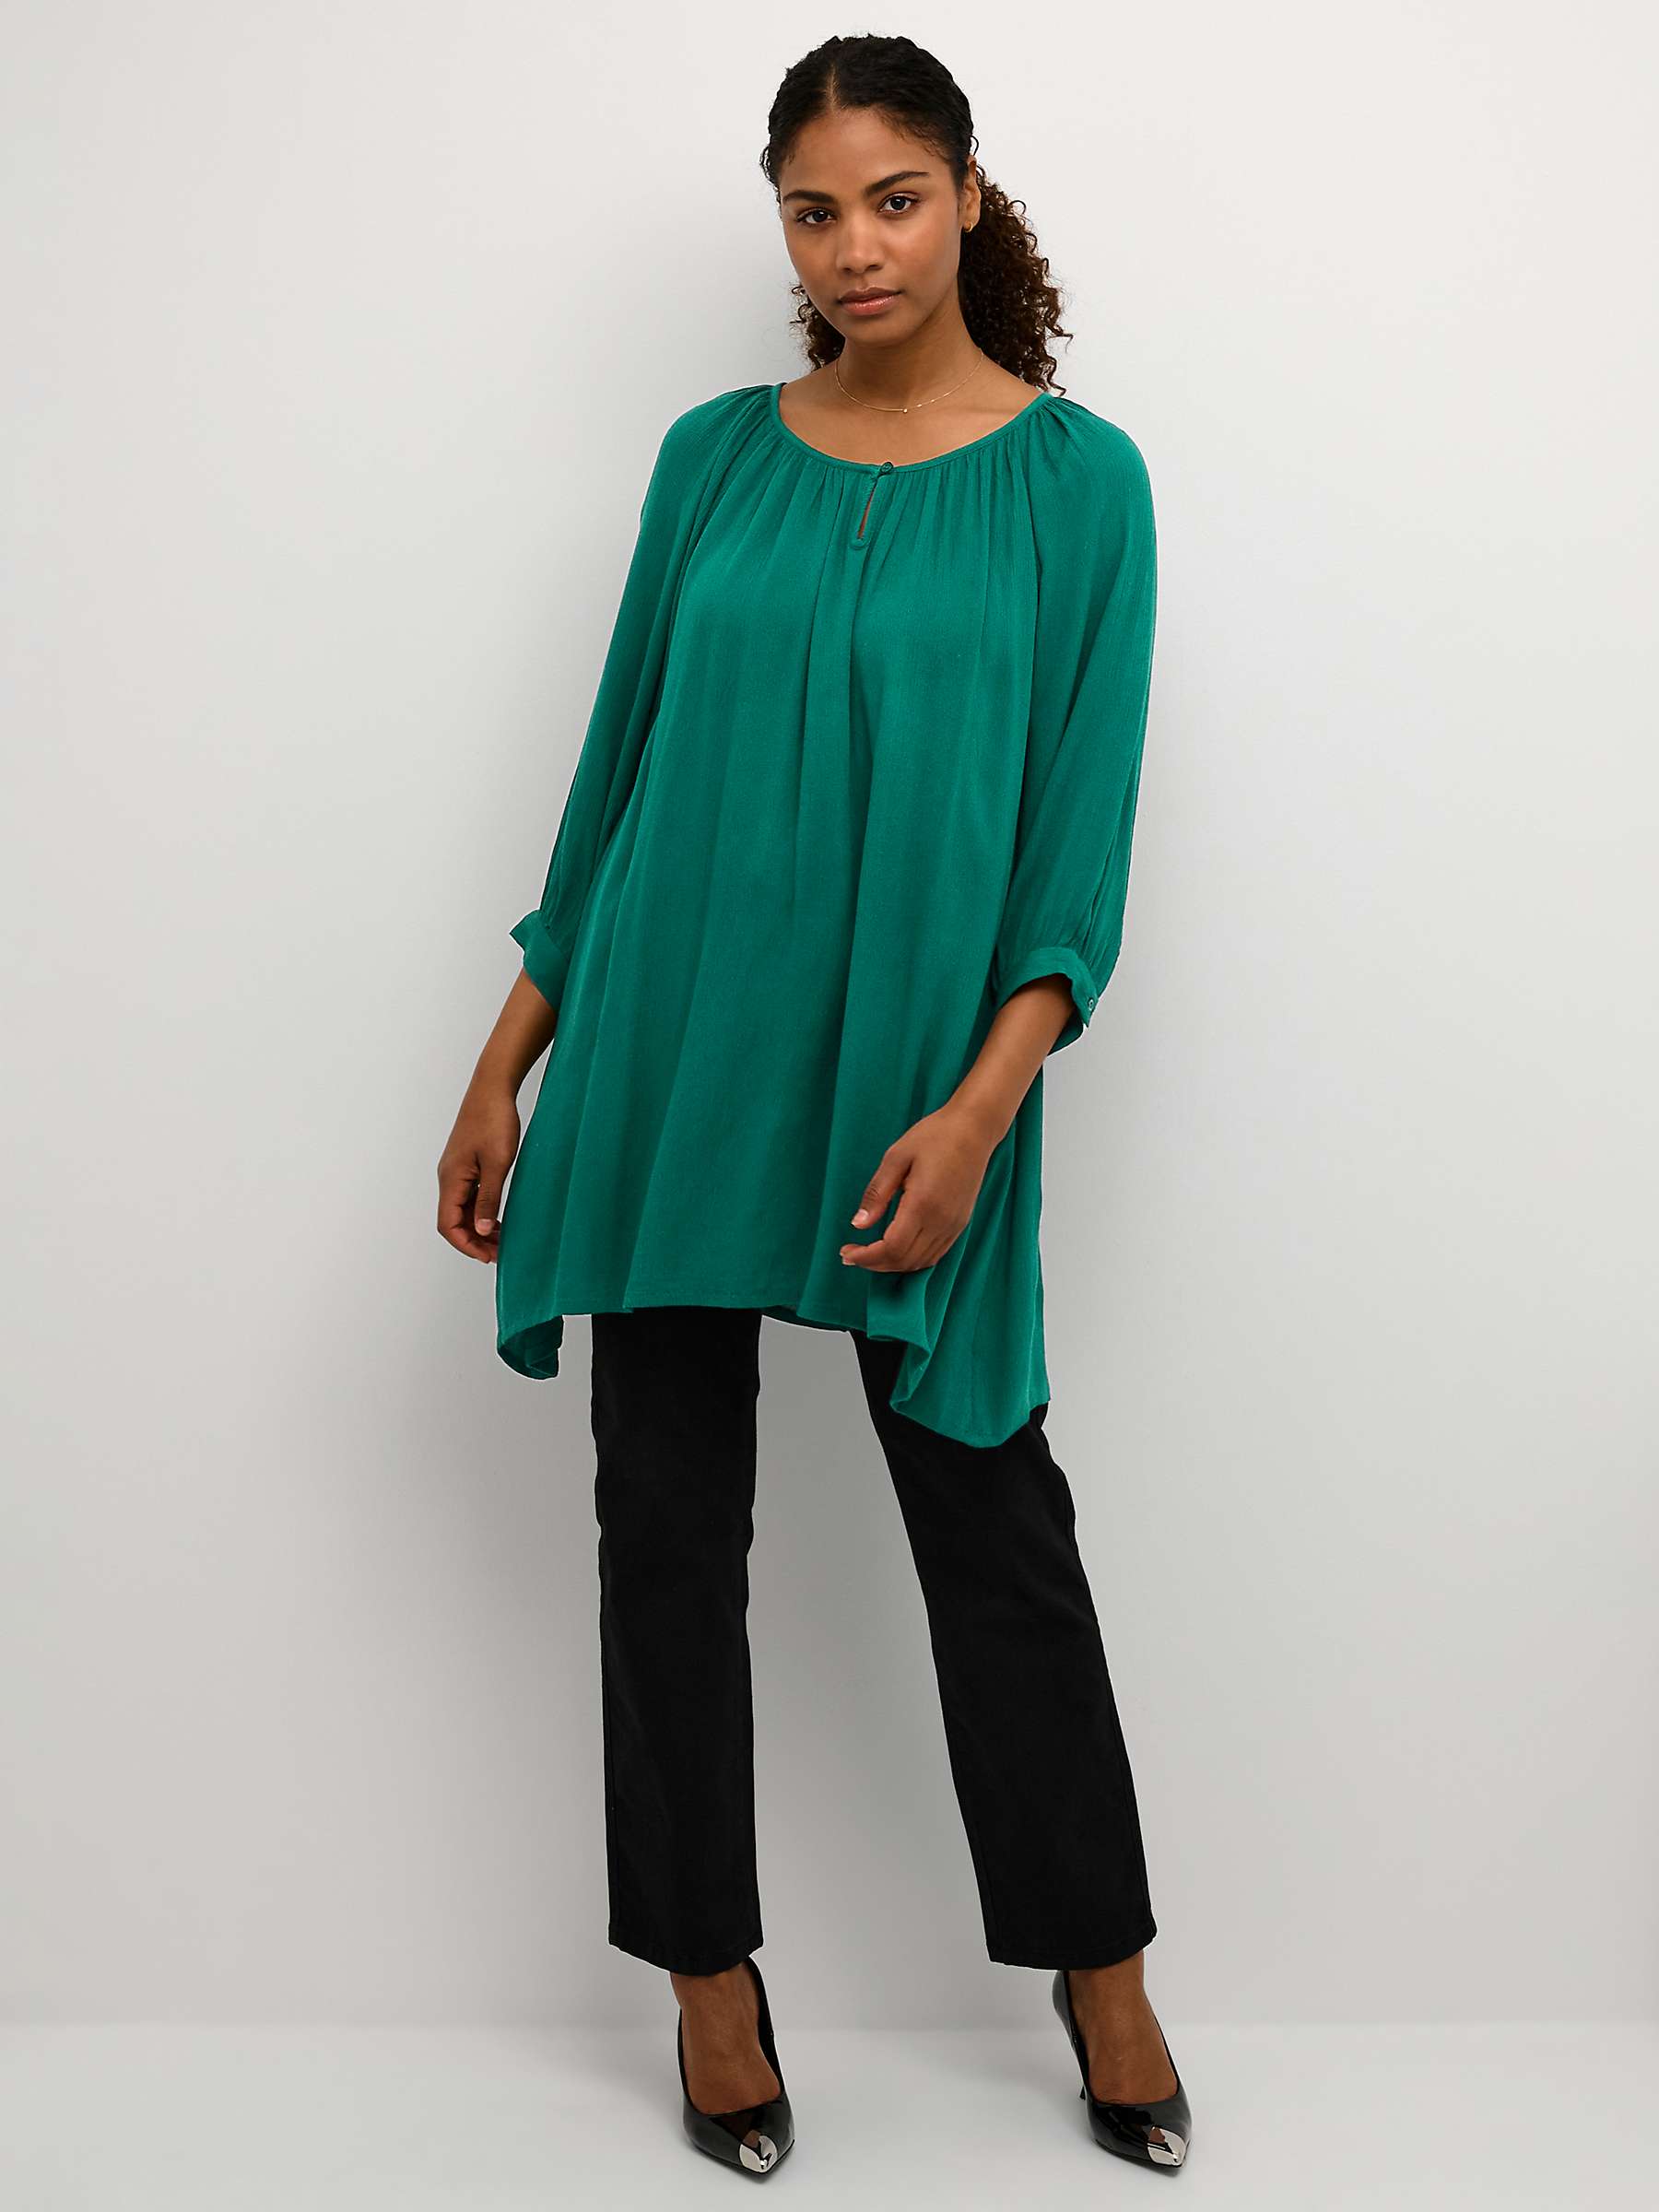 Buy KAFFE Amber 3/4 Sleeve Tunic Top Online at johnlewis.com